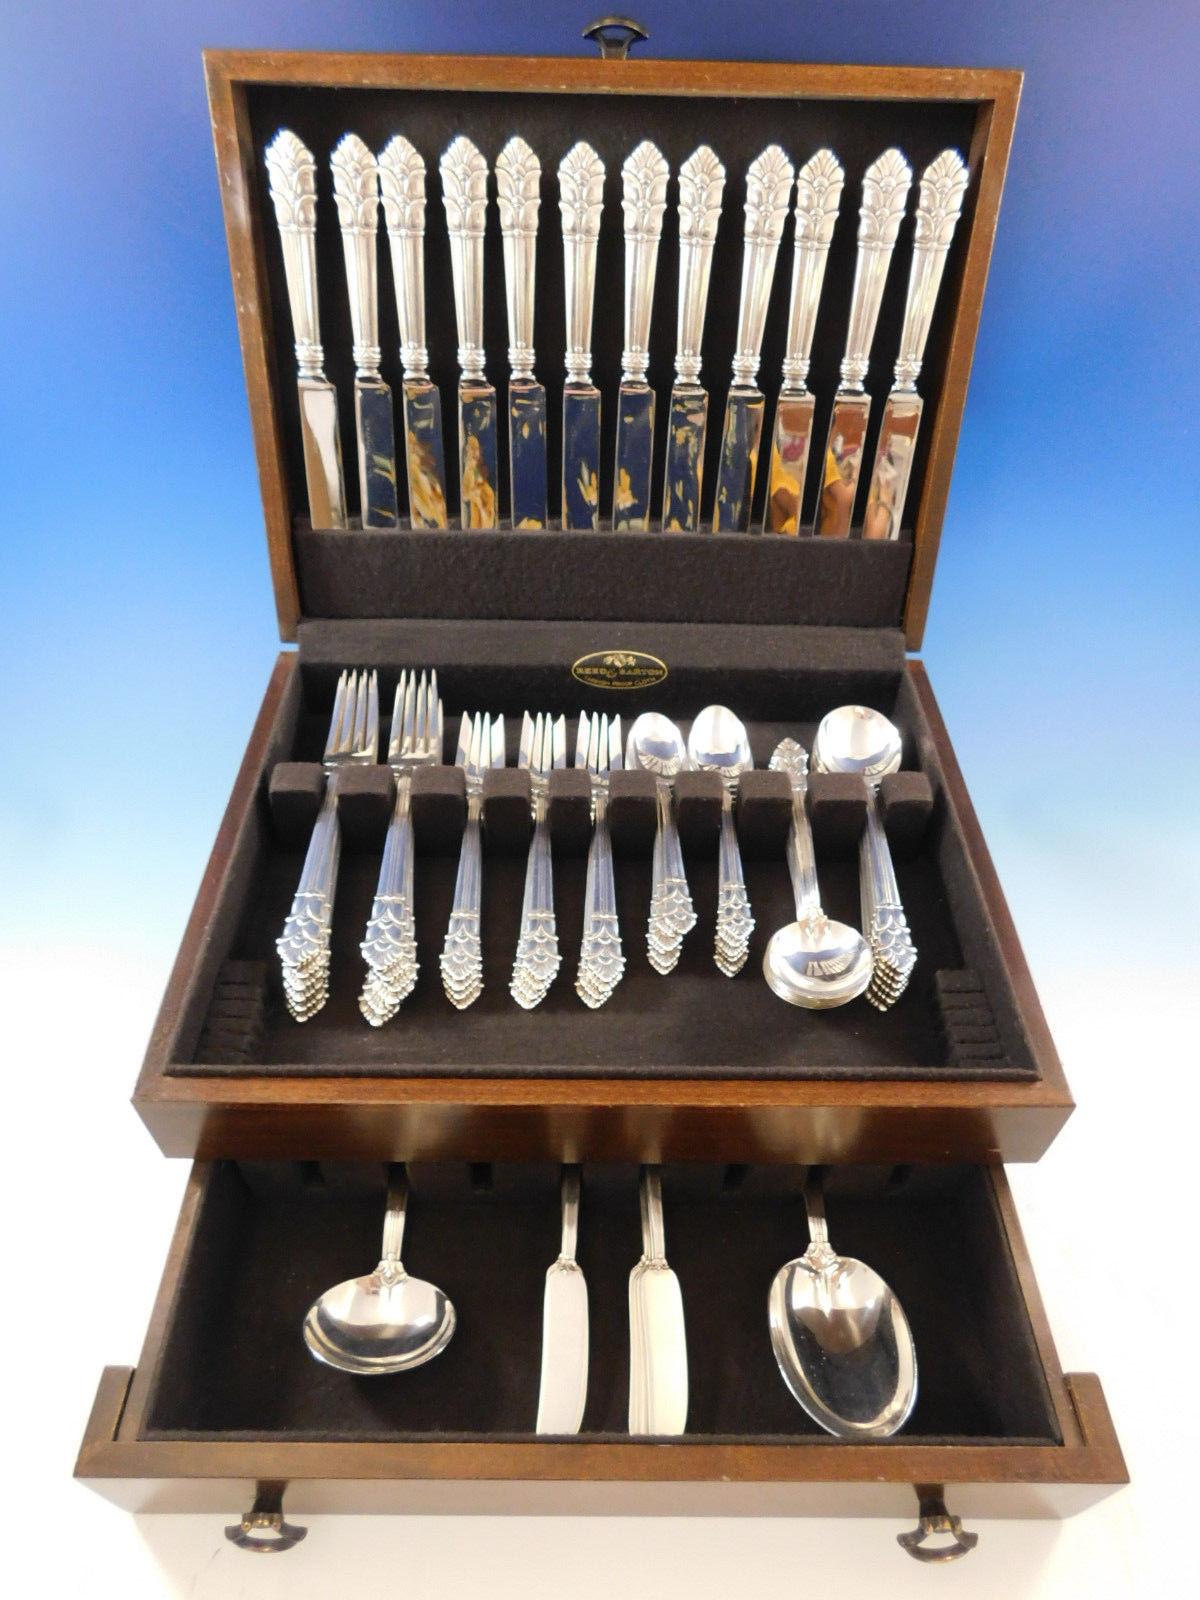 Scarce dinner size Palmette by Tiffany & Co. Sterling silver flatware set - 74 pieces. This set includes:

12 dinner size knives, 9 5/8